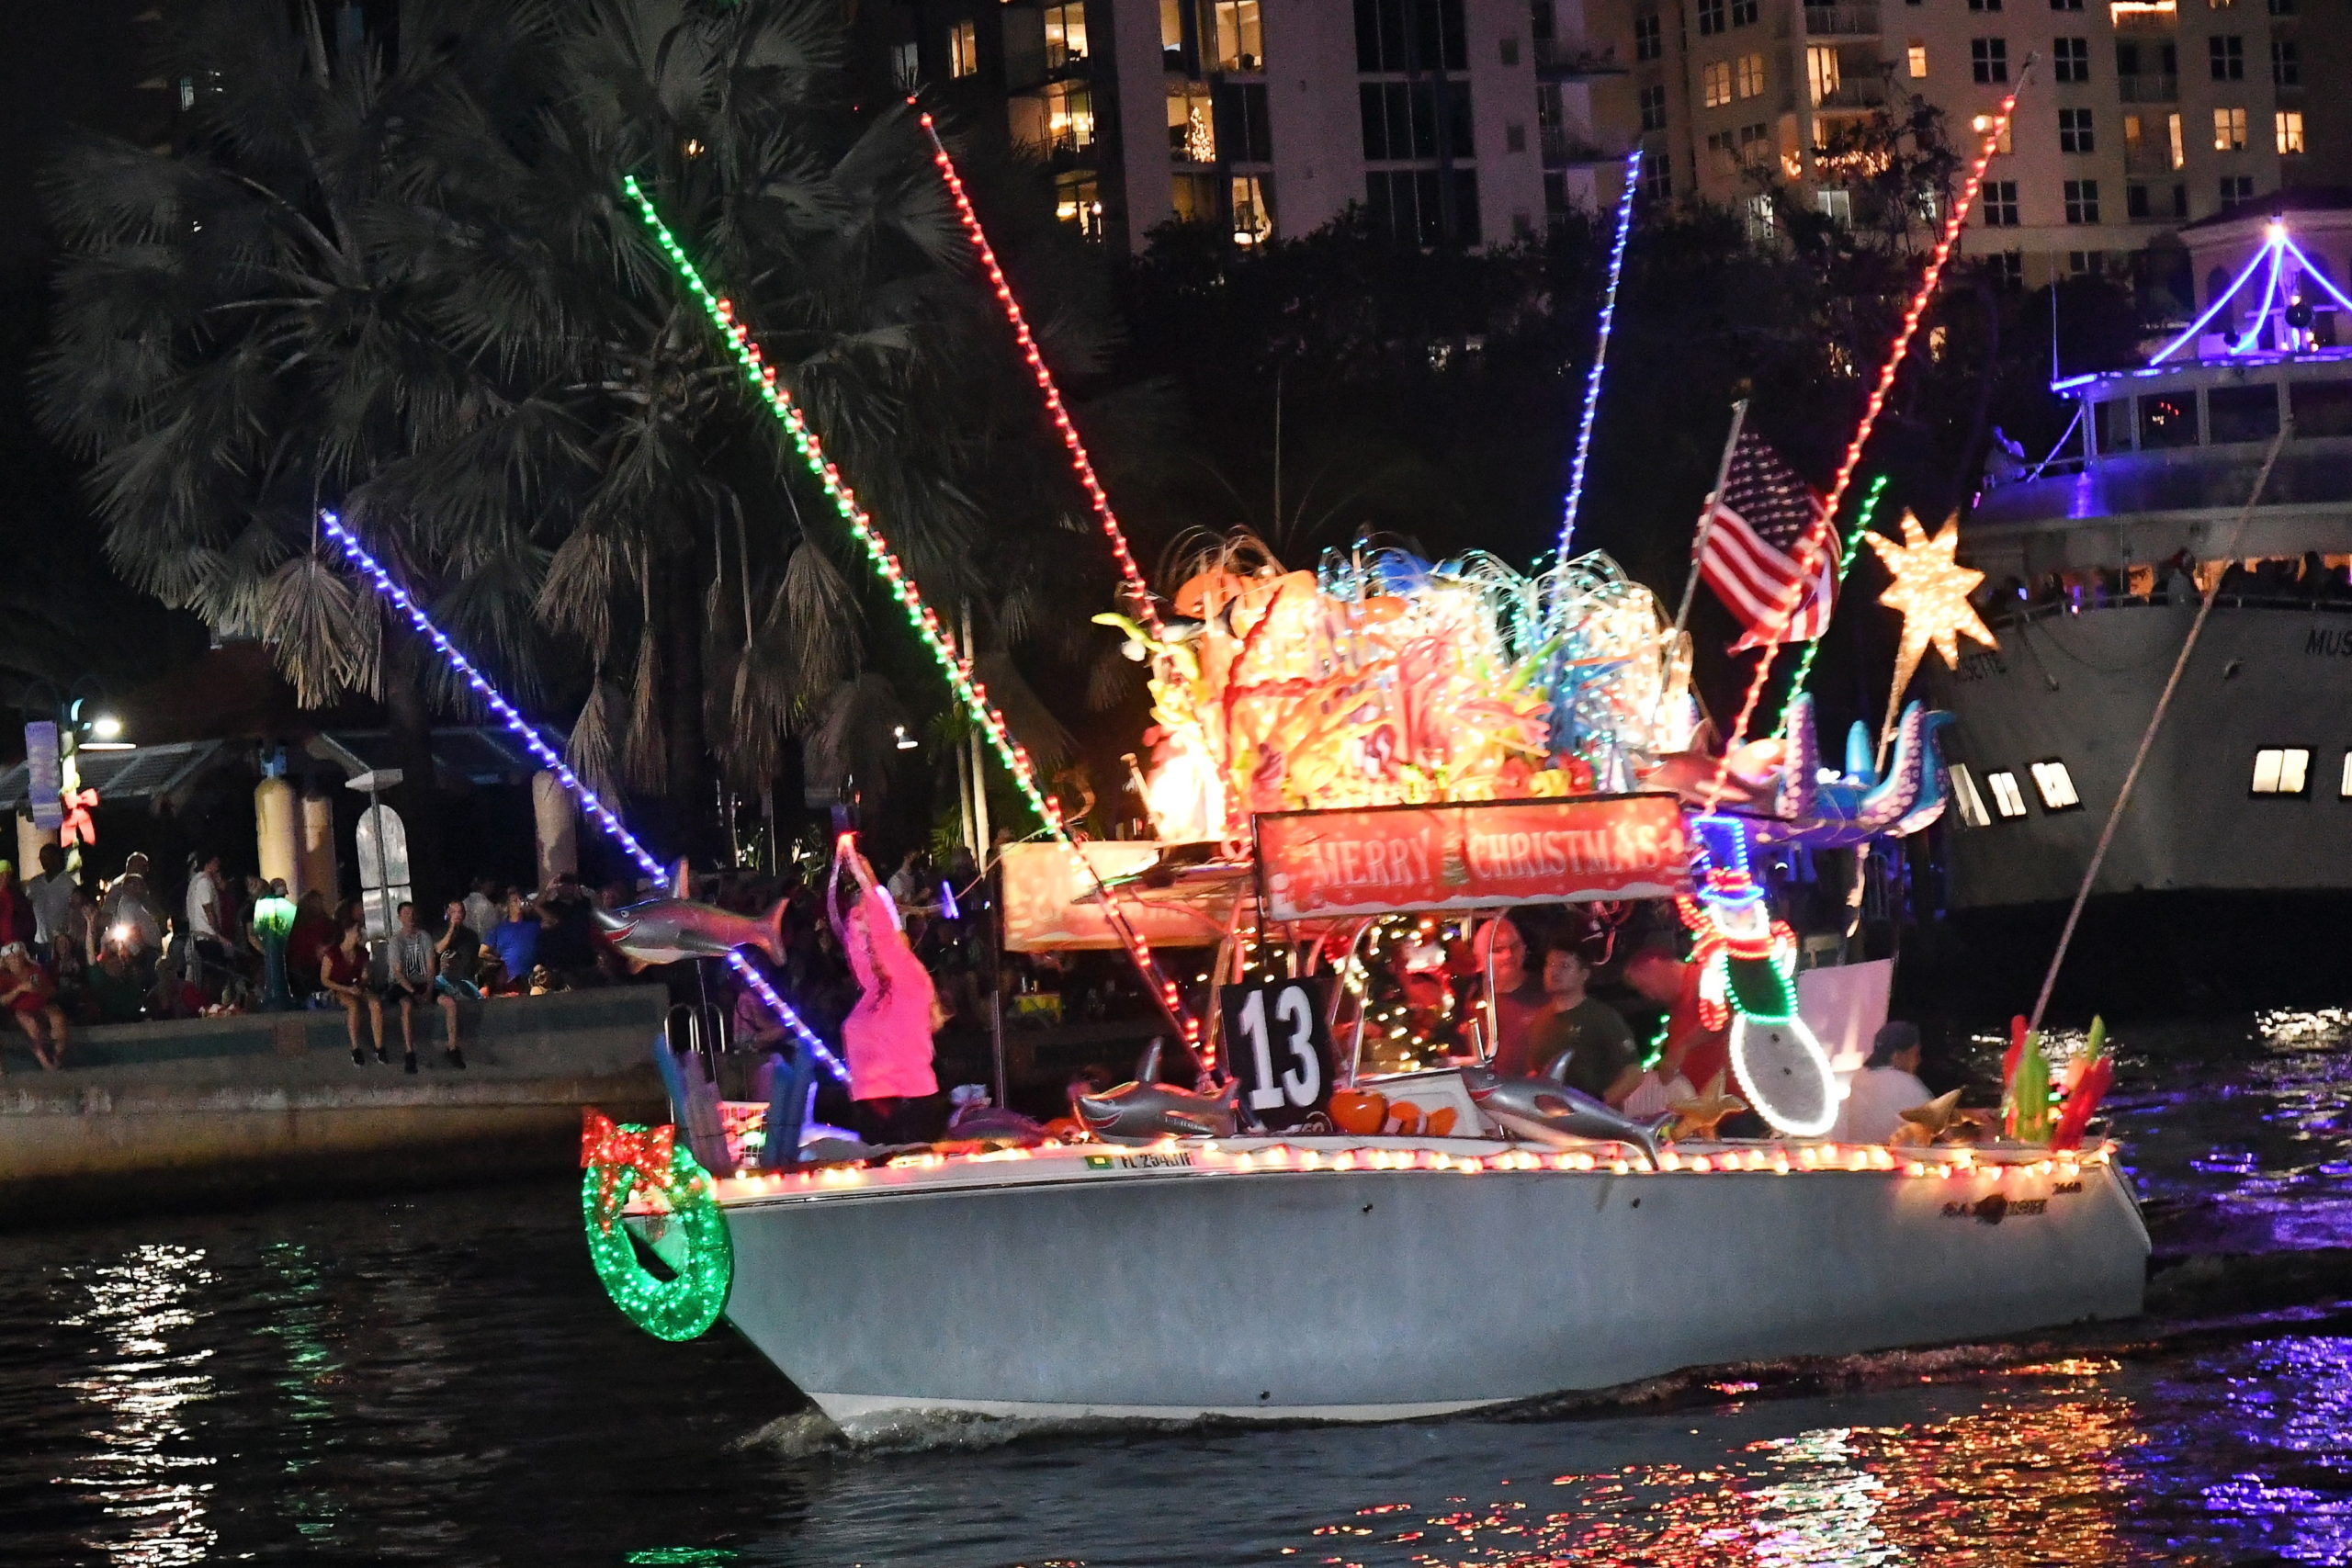 26’ Sailfish, boat number 13 in the 2022 Winterfest Boat Parade